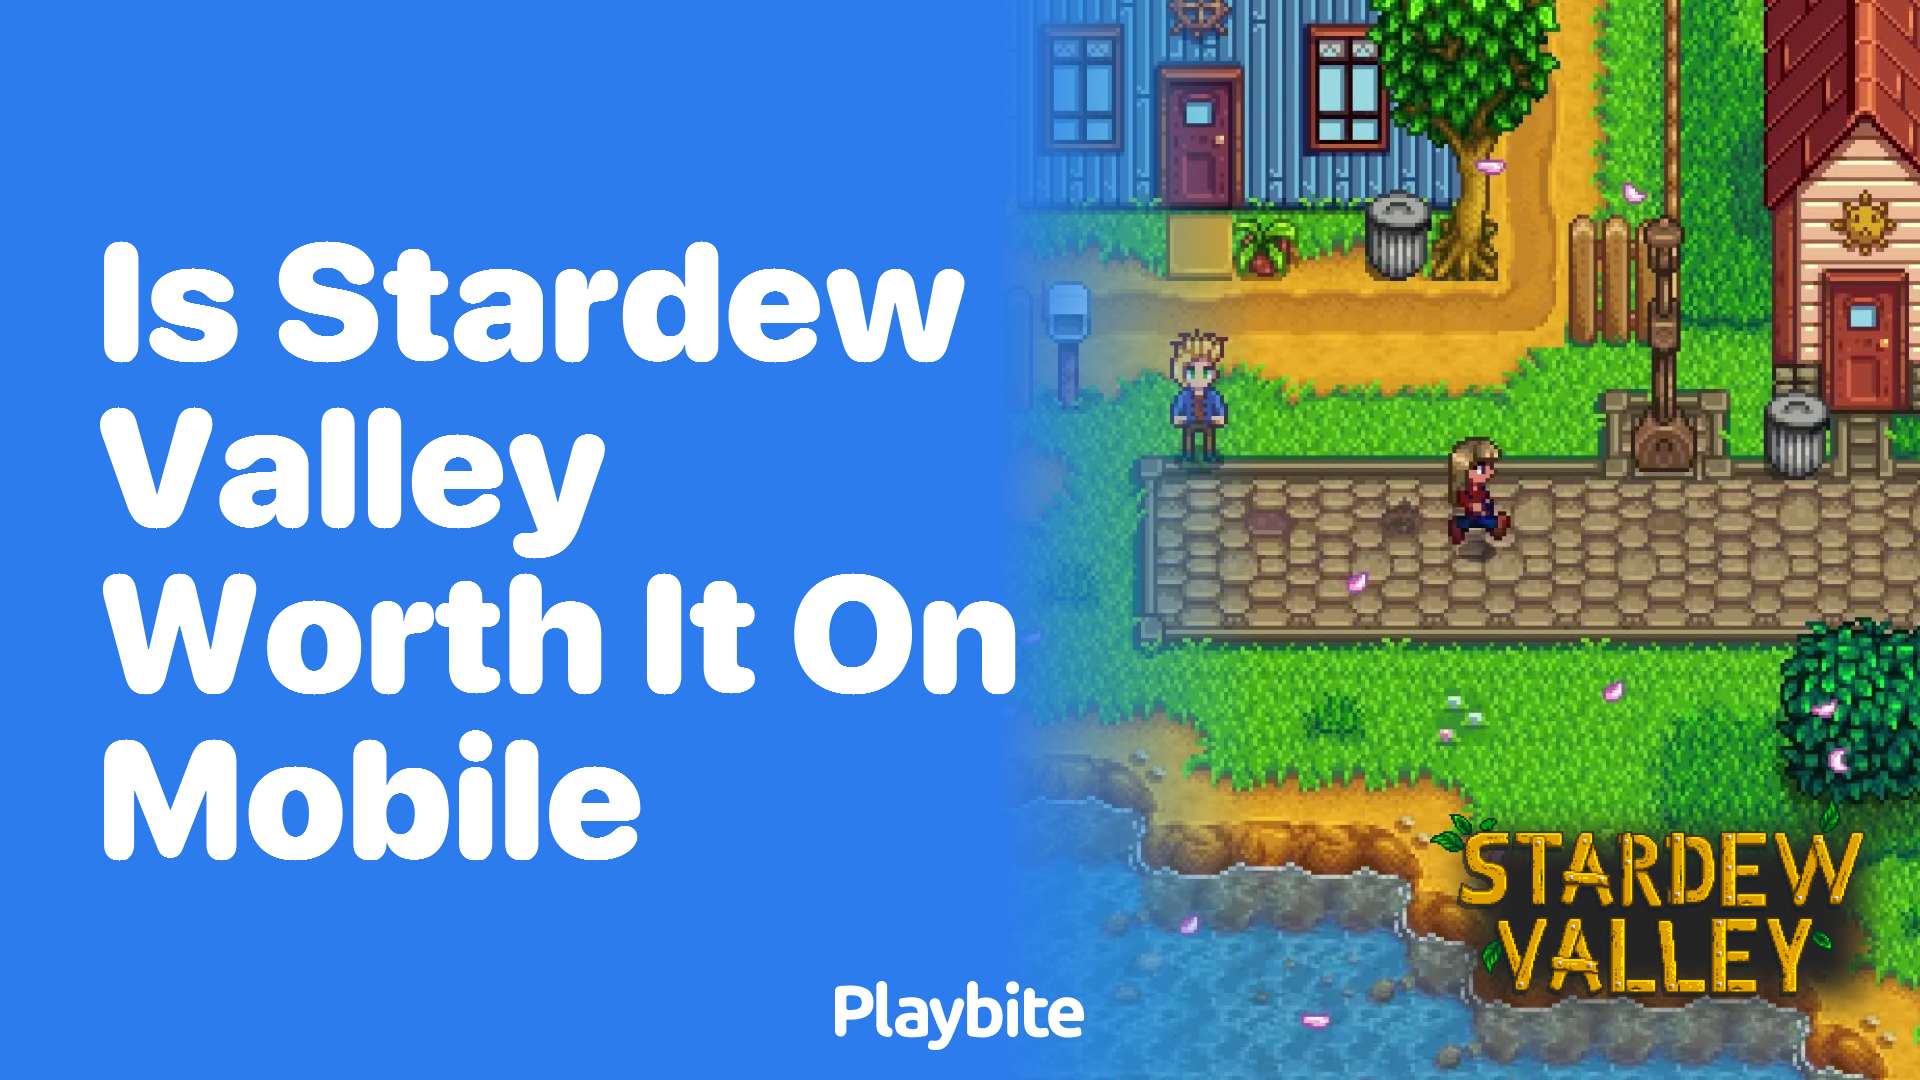 Is Stardew Valley Worth It on Mobile?